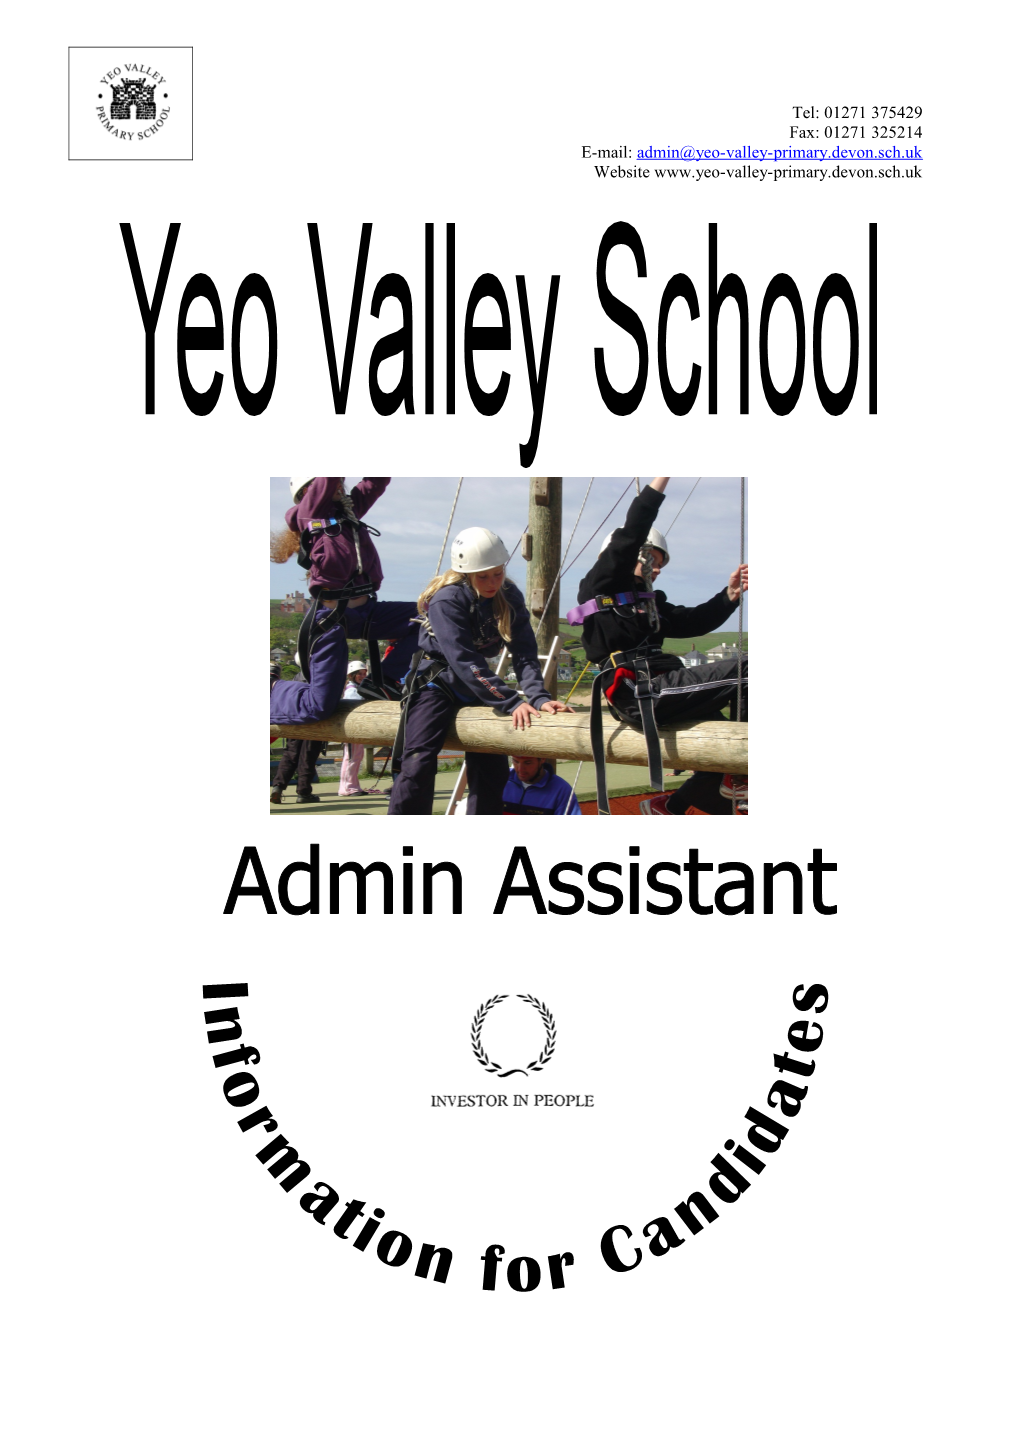 Post of Administrative Assistant at Yeovalleyschool